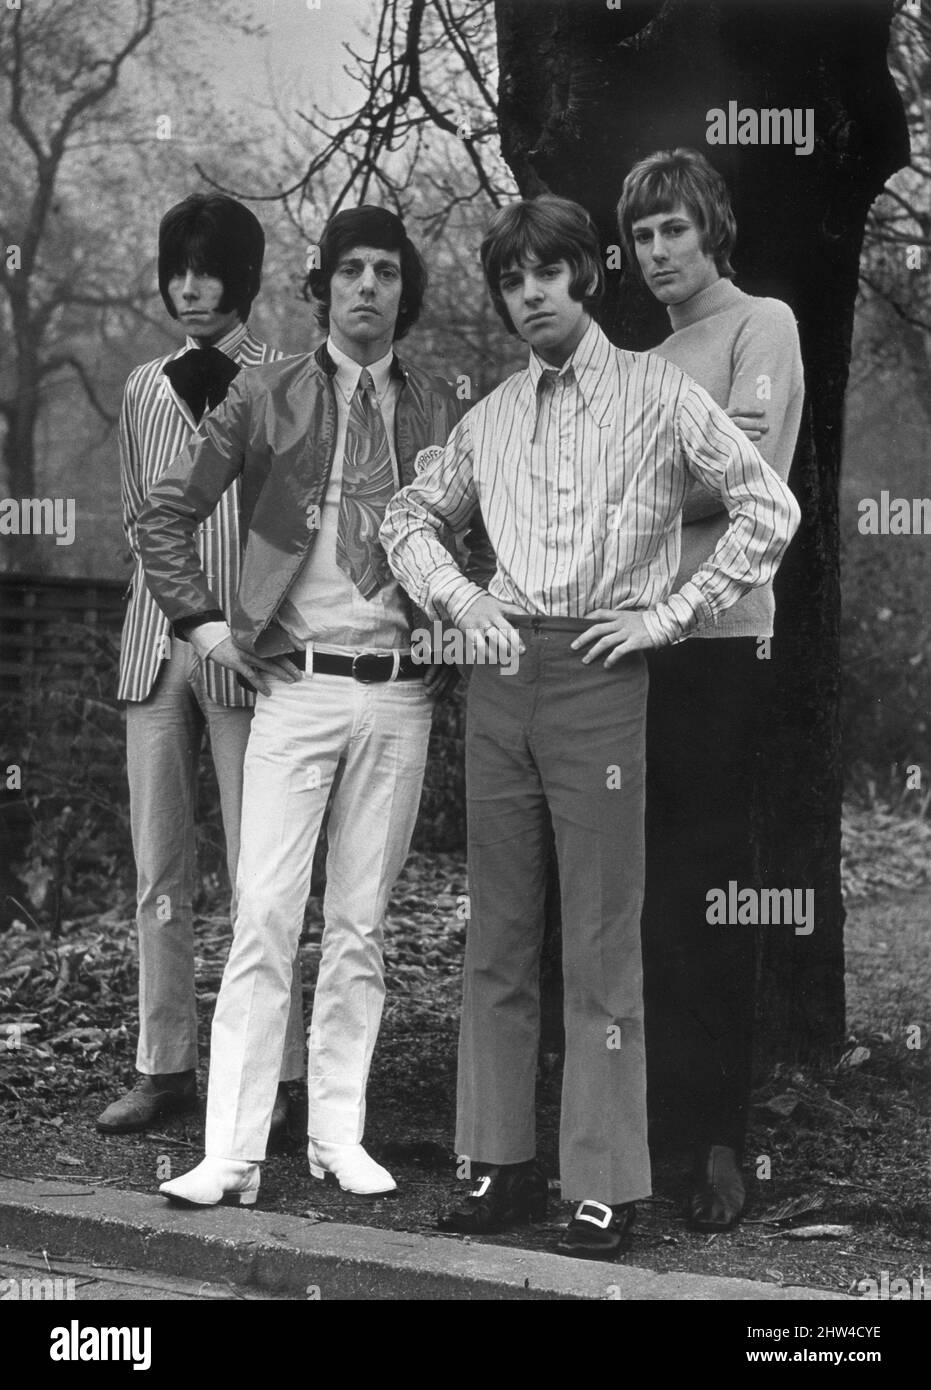 Die Popgruppe ' The Herd ', l-r Andy Brown, Andy Steele, Peter Frampton und Gary Taylor. Circa 1967. Stockfoto